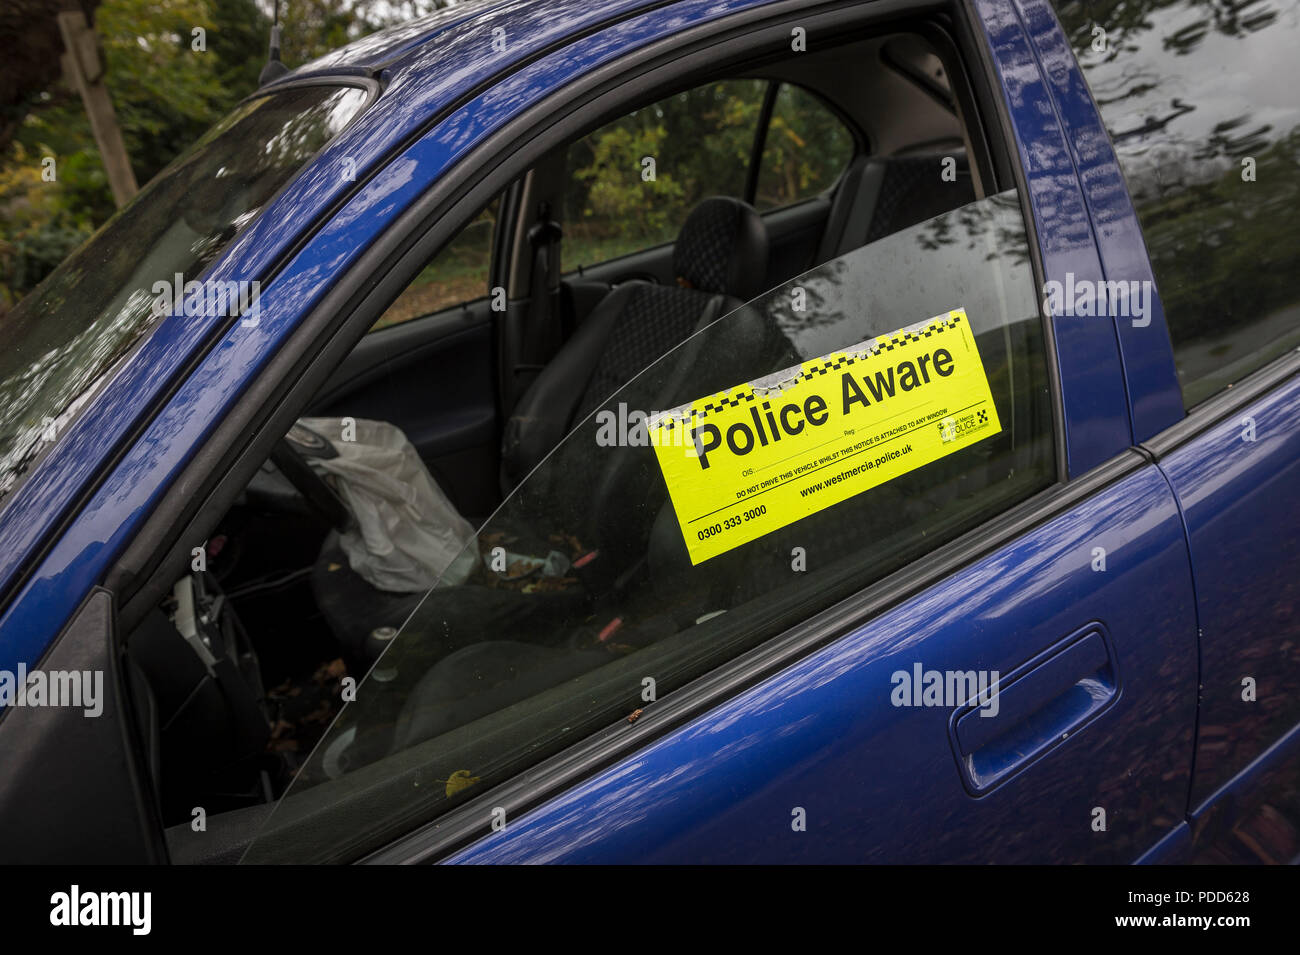 Police Aware sticker on an abandoned vehicle. Stock Photo